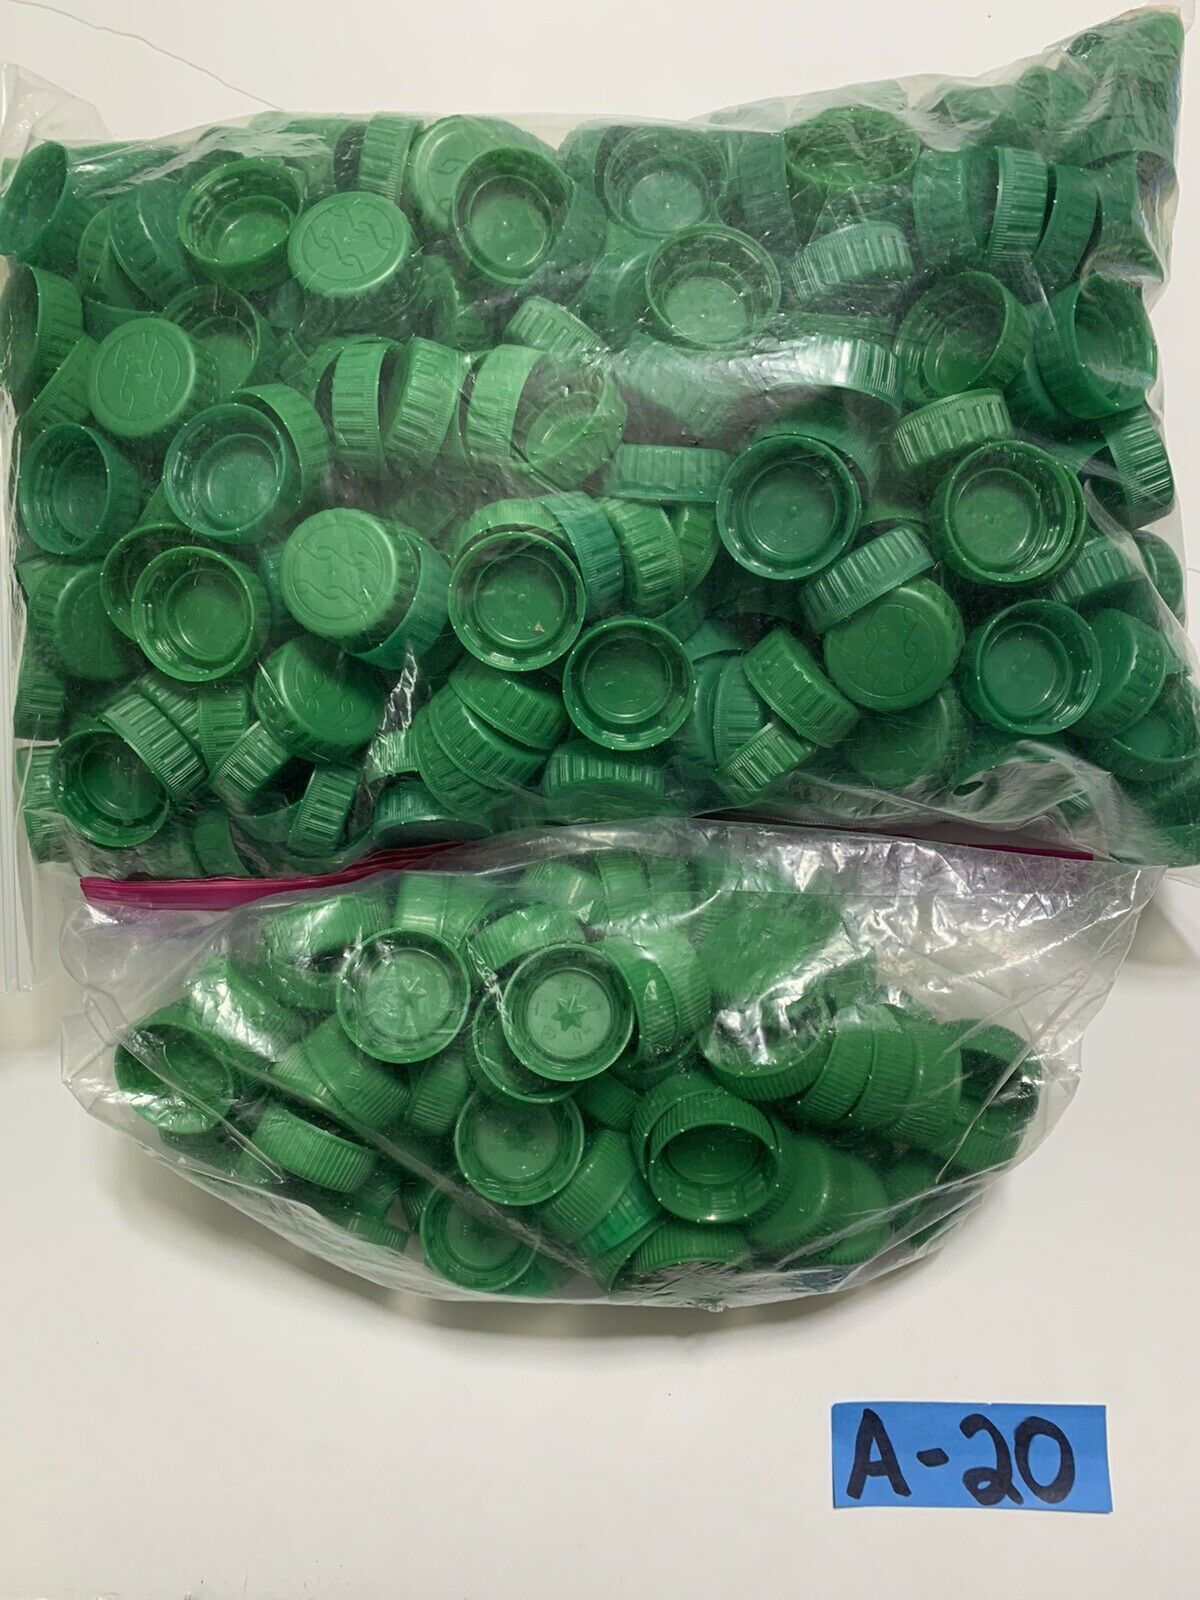 100 Green Plastic Soda /water Bottle Screw Caps Project Arts & Crafts Free S&h.